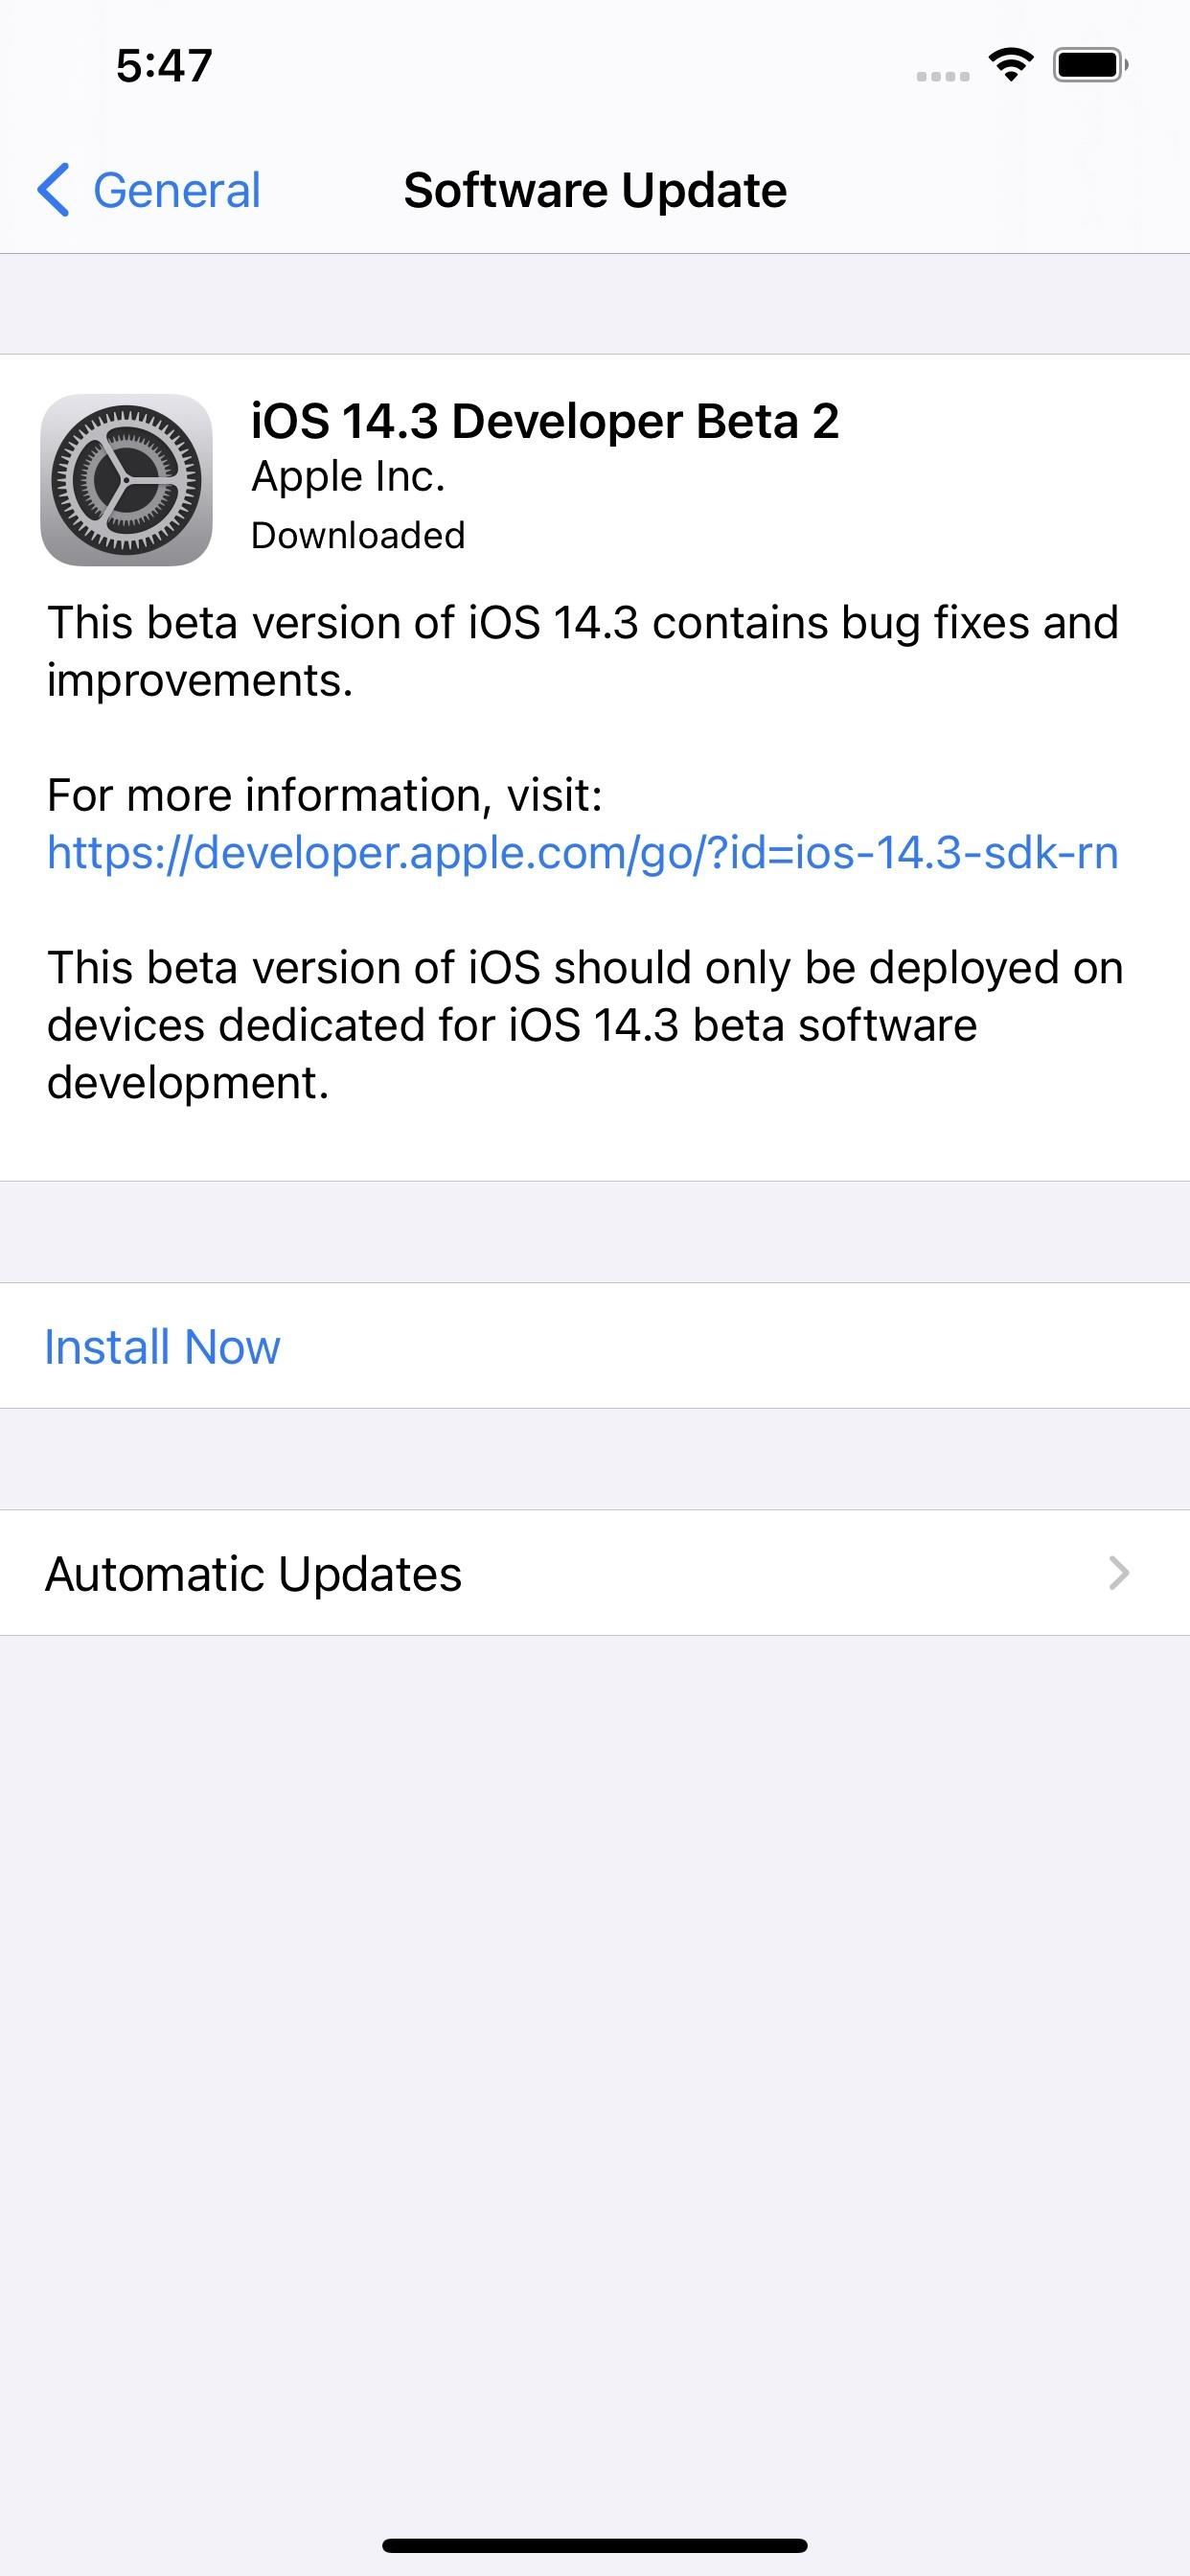 Apple Releases iOS 14.3 Beta 2 for Developers & Public Beta Users, Includes Improved Home Screen Shortcuts